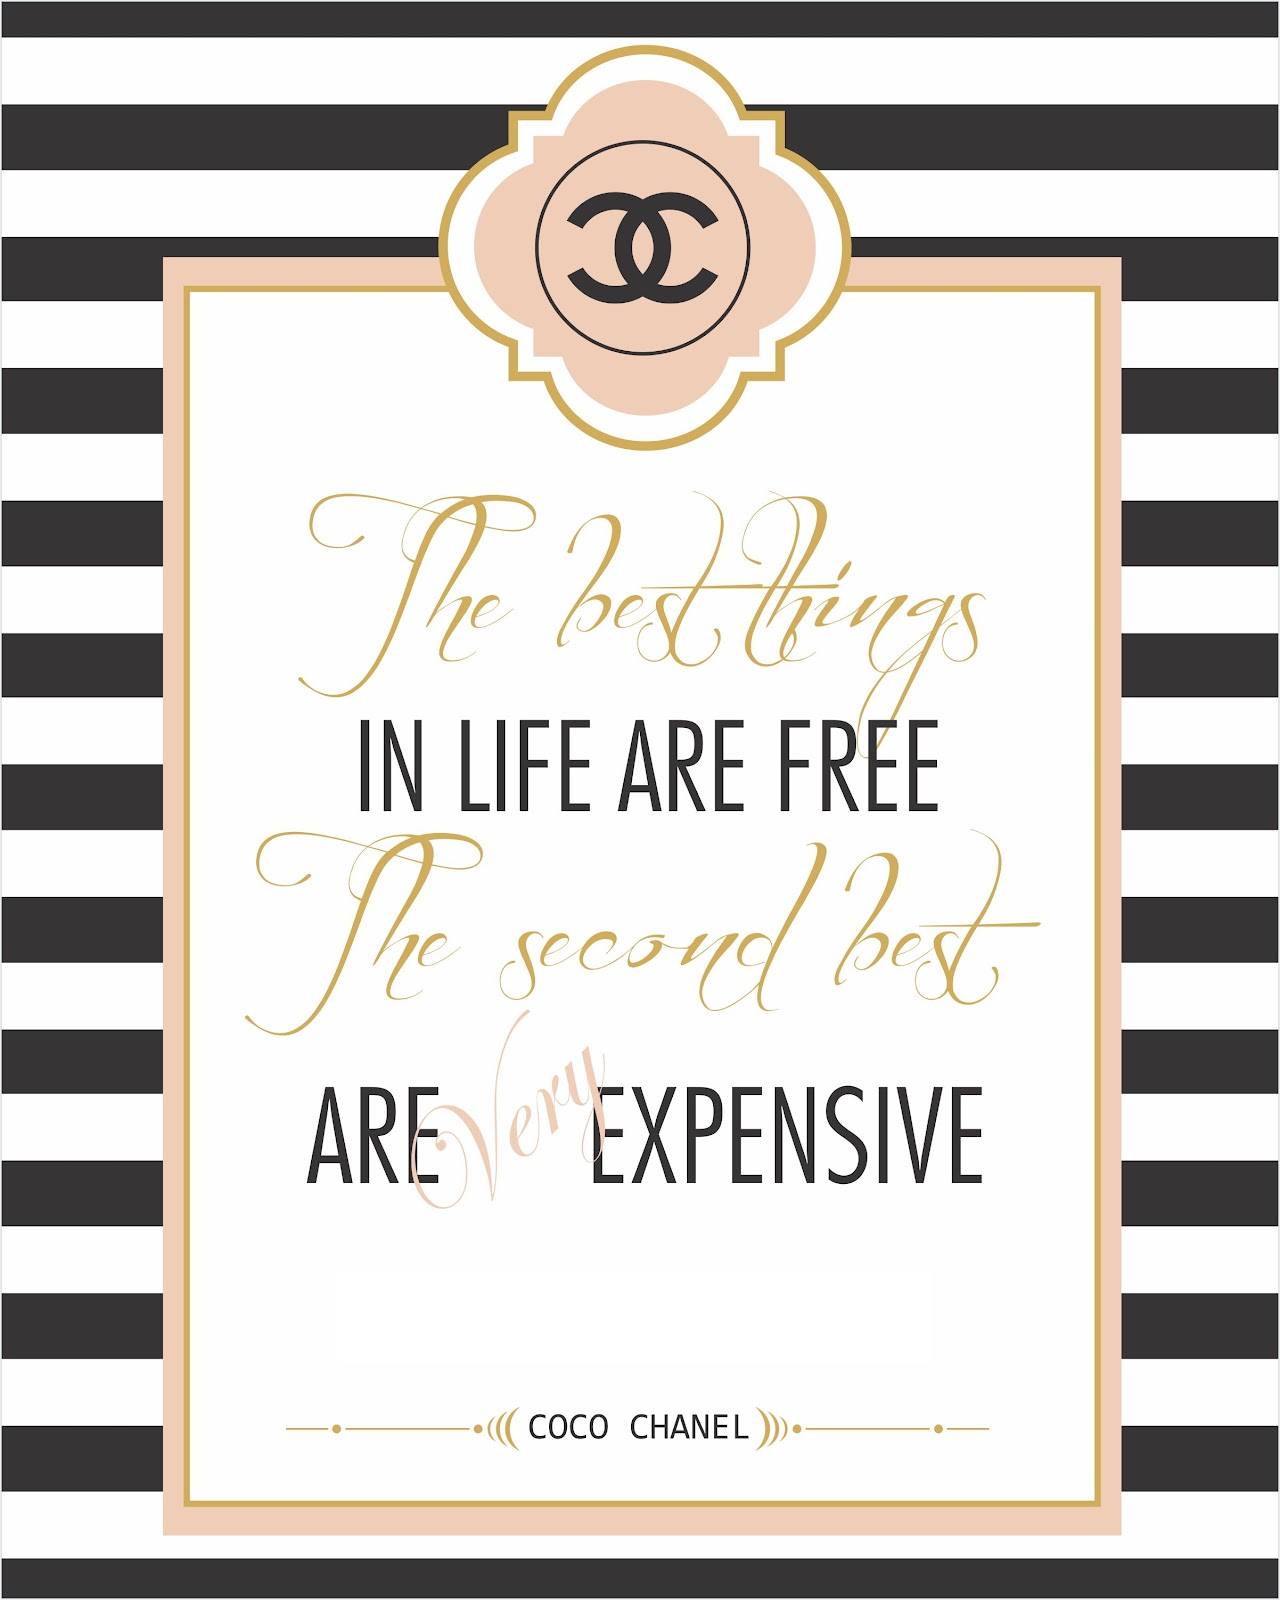 Second Life Marketplace - Coco Chanel Quote, The Best Things In Life